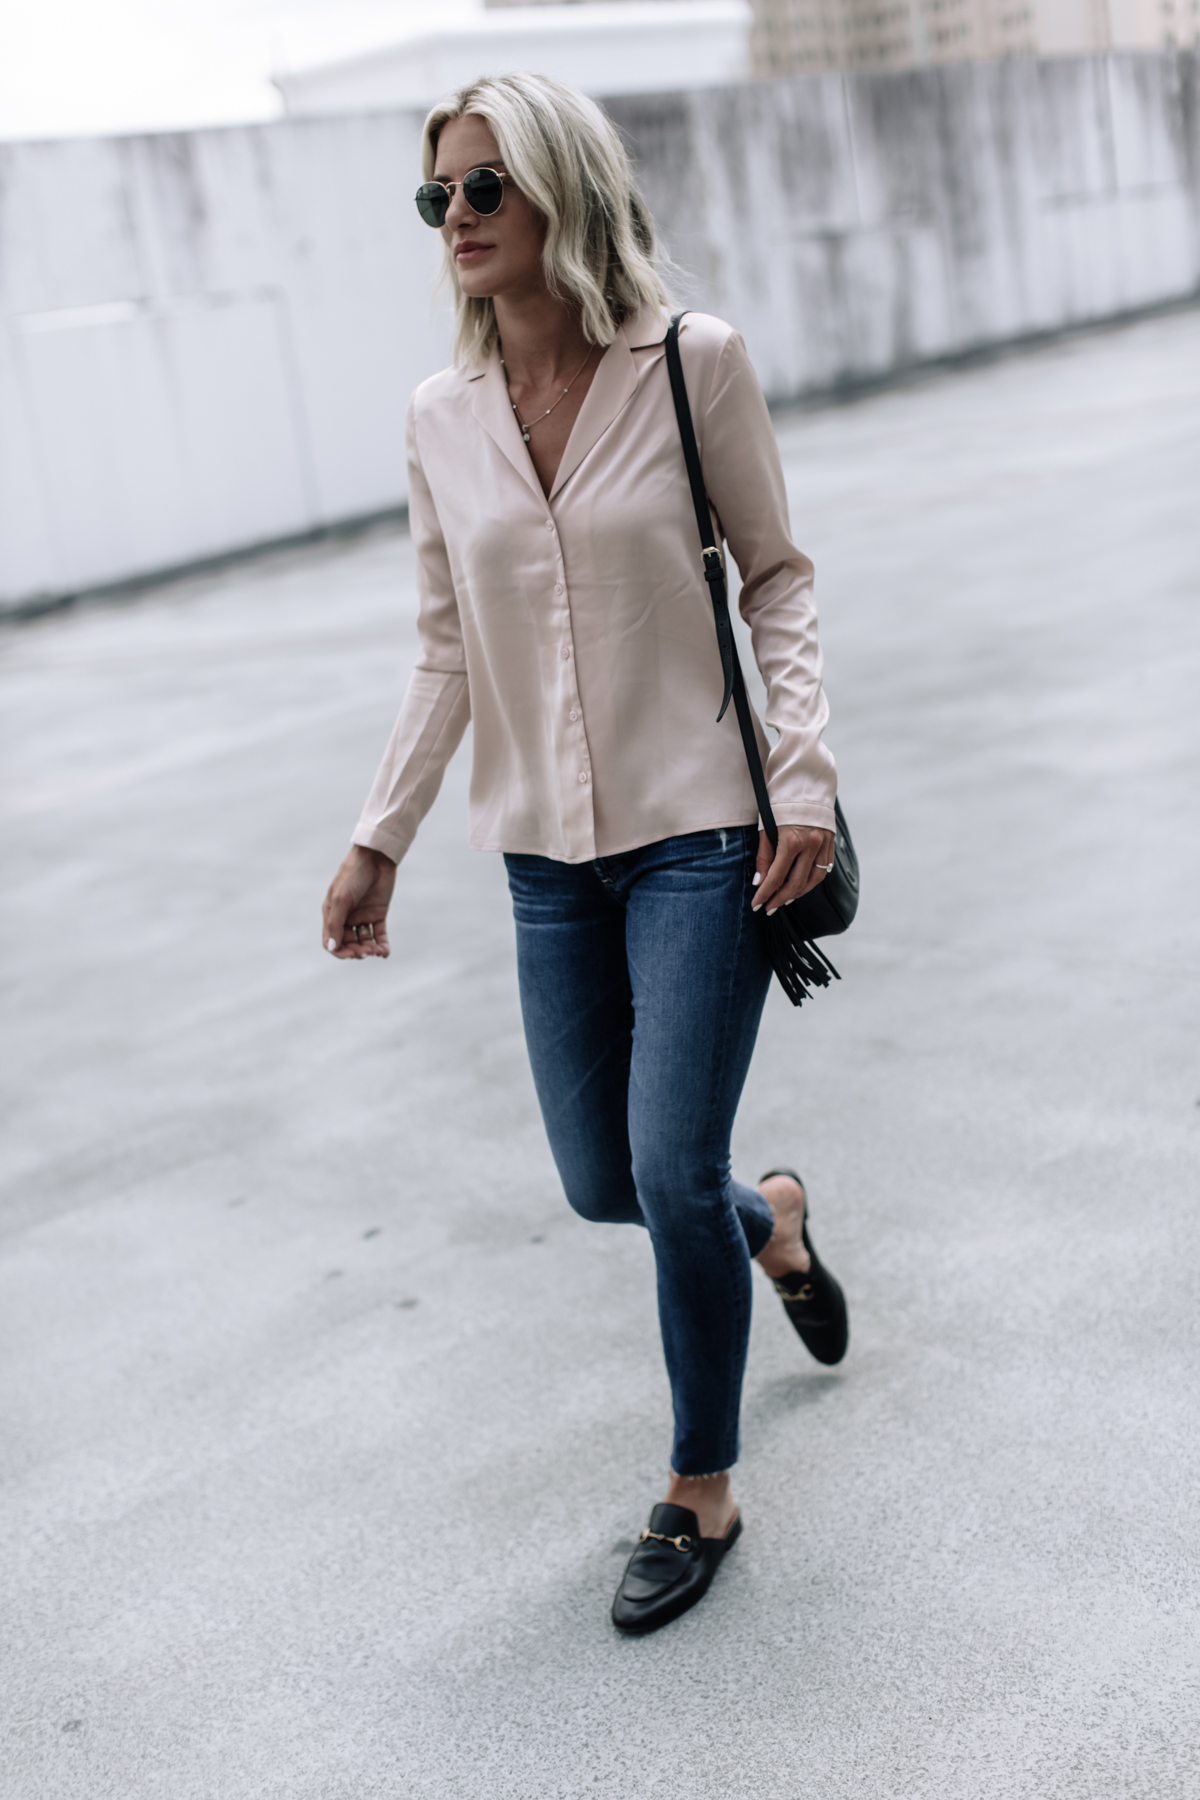 blush satin pj top outfit from Nordstrom Anniversary Sale 2017